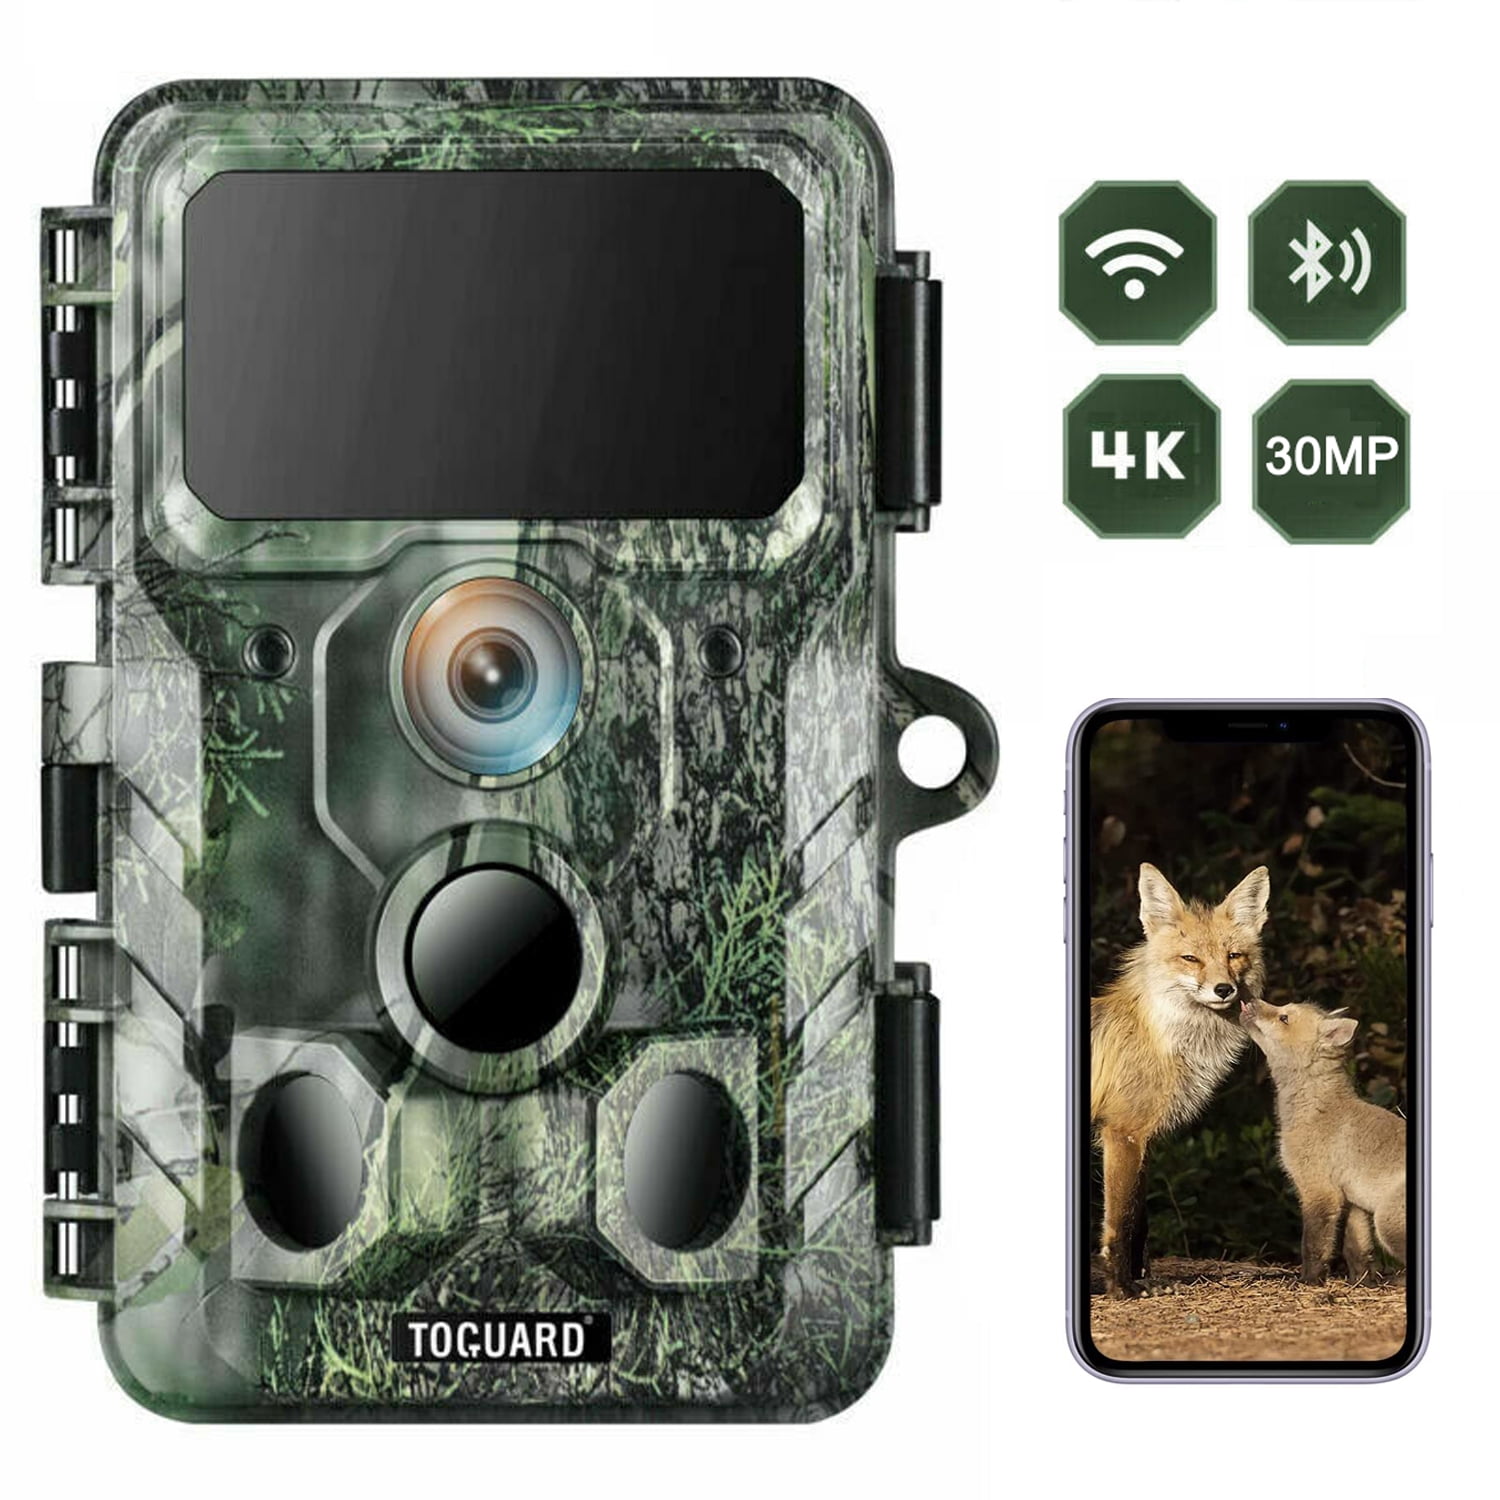 WiFi 1080P FHD Waterproof Infrared Wildlife Night Vision Hunting Trail Camera 